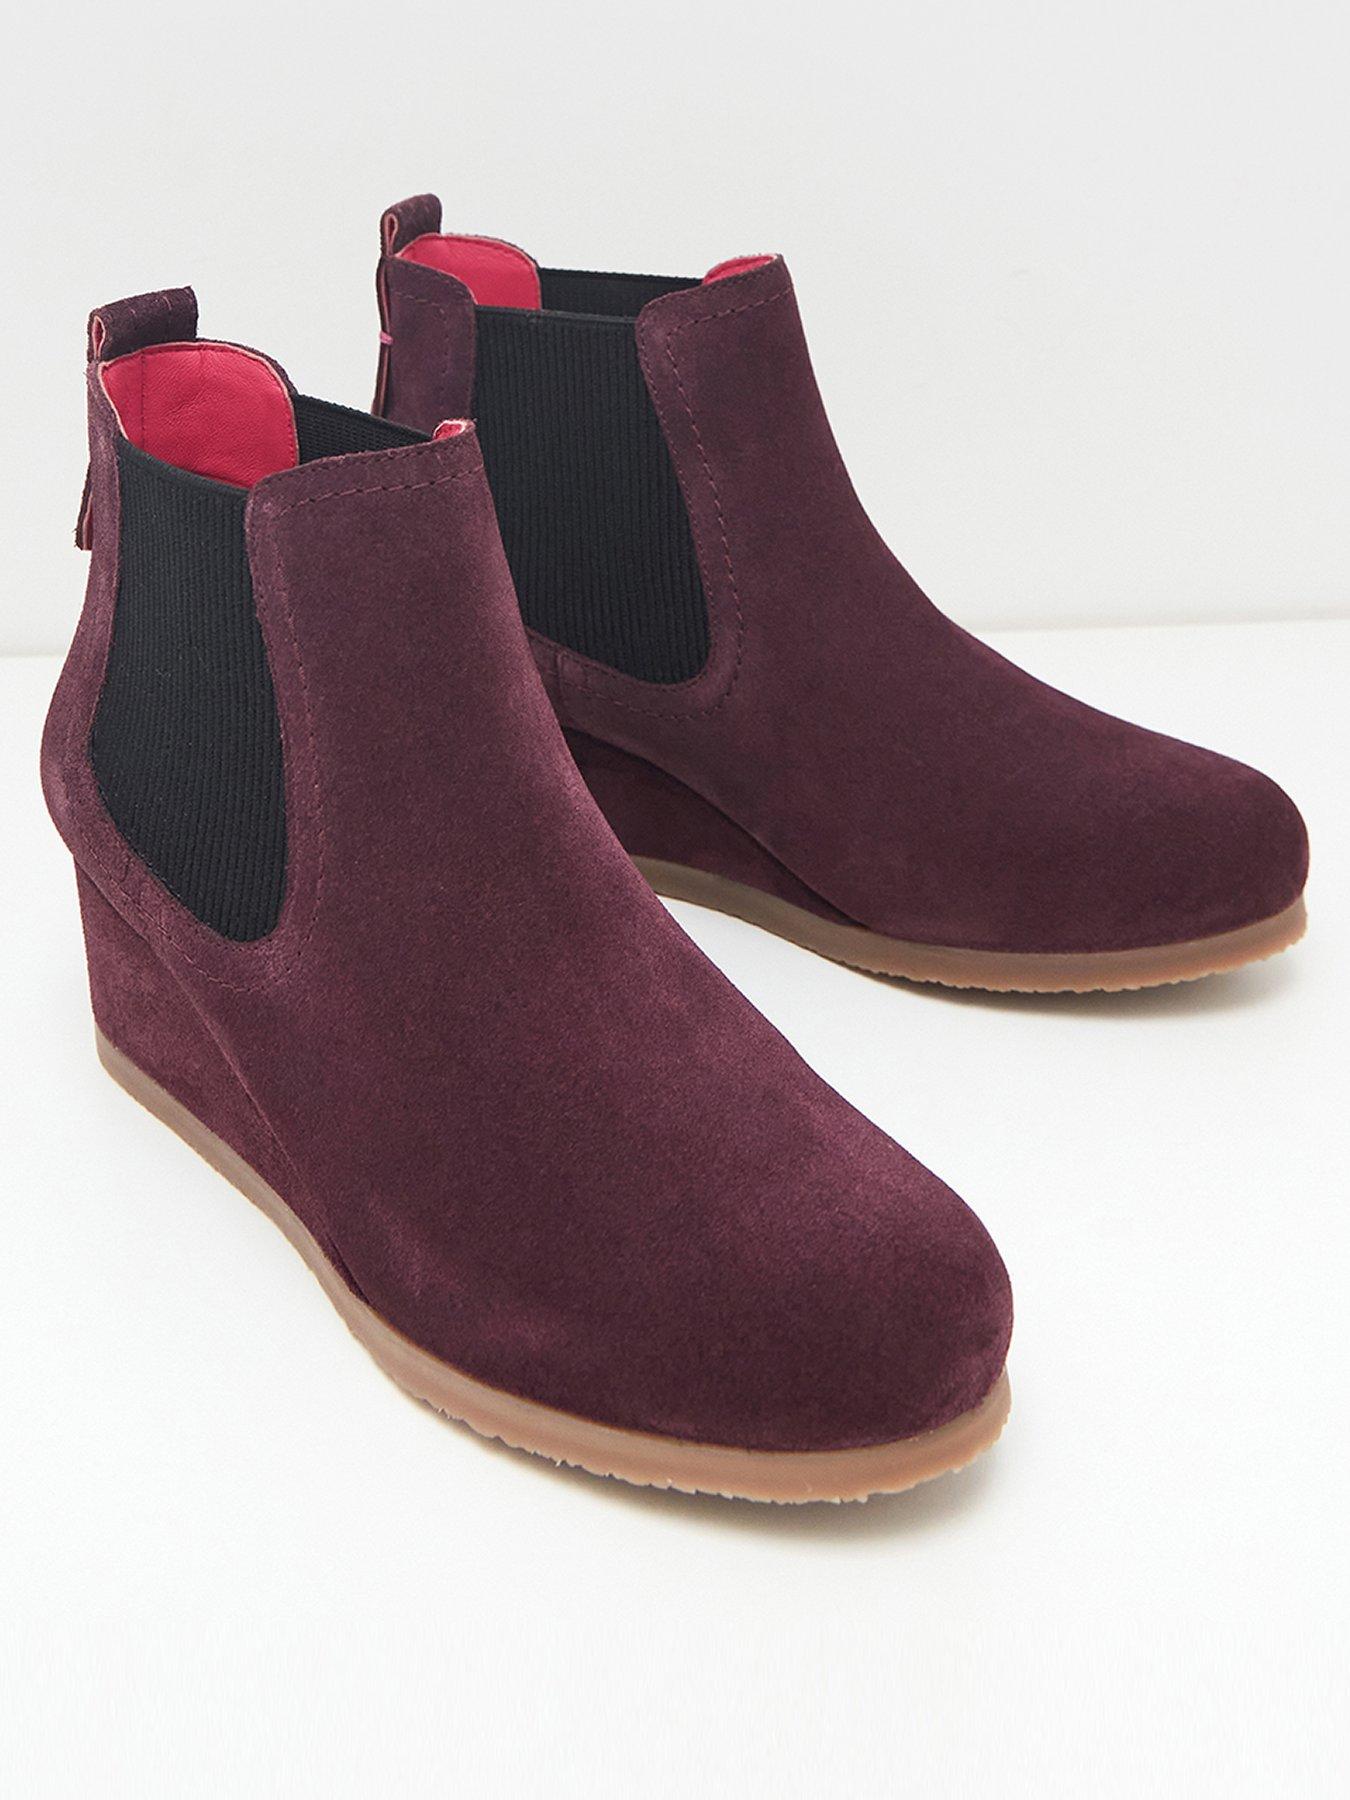 Shoes & boots Issy Suede Wedge Boot - Plum